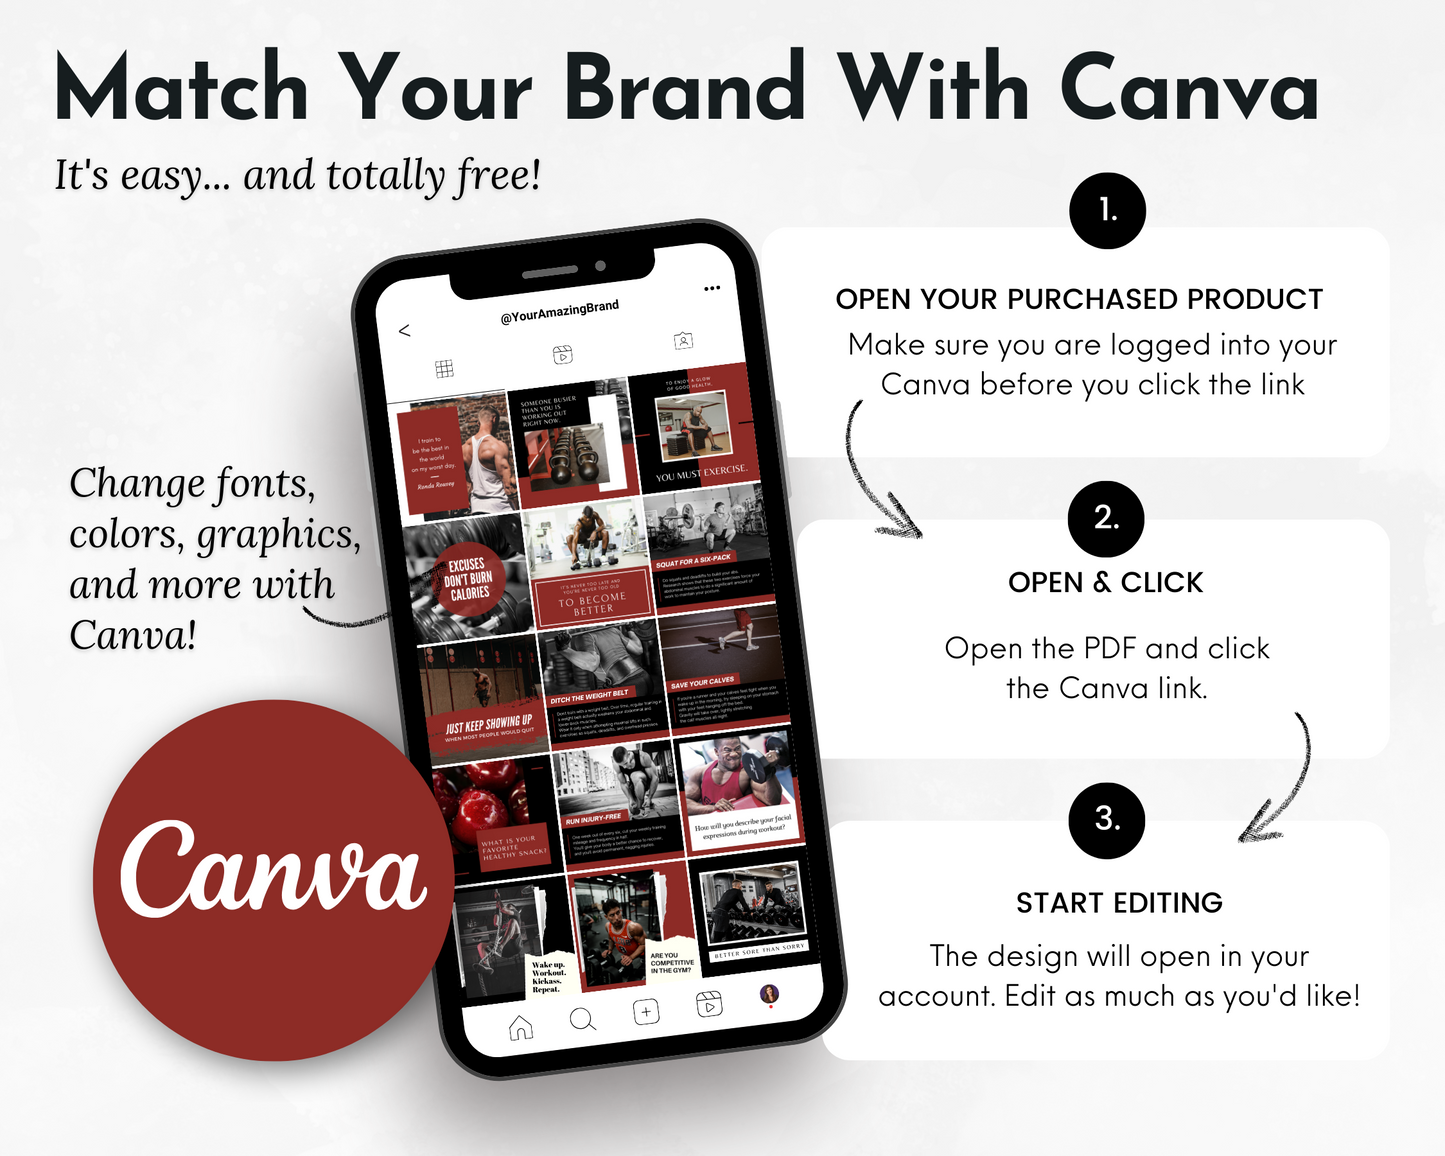 Match your brand with Socially Inclined canvas featuring Men's Fitness social media content and promoting a healthy lifestyle.